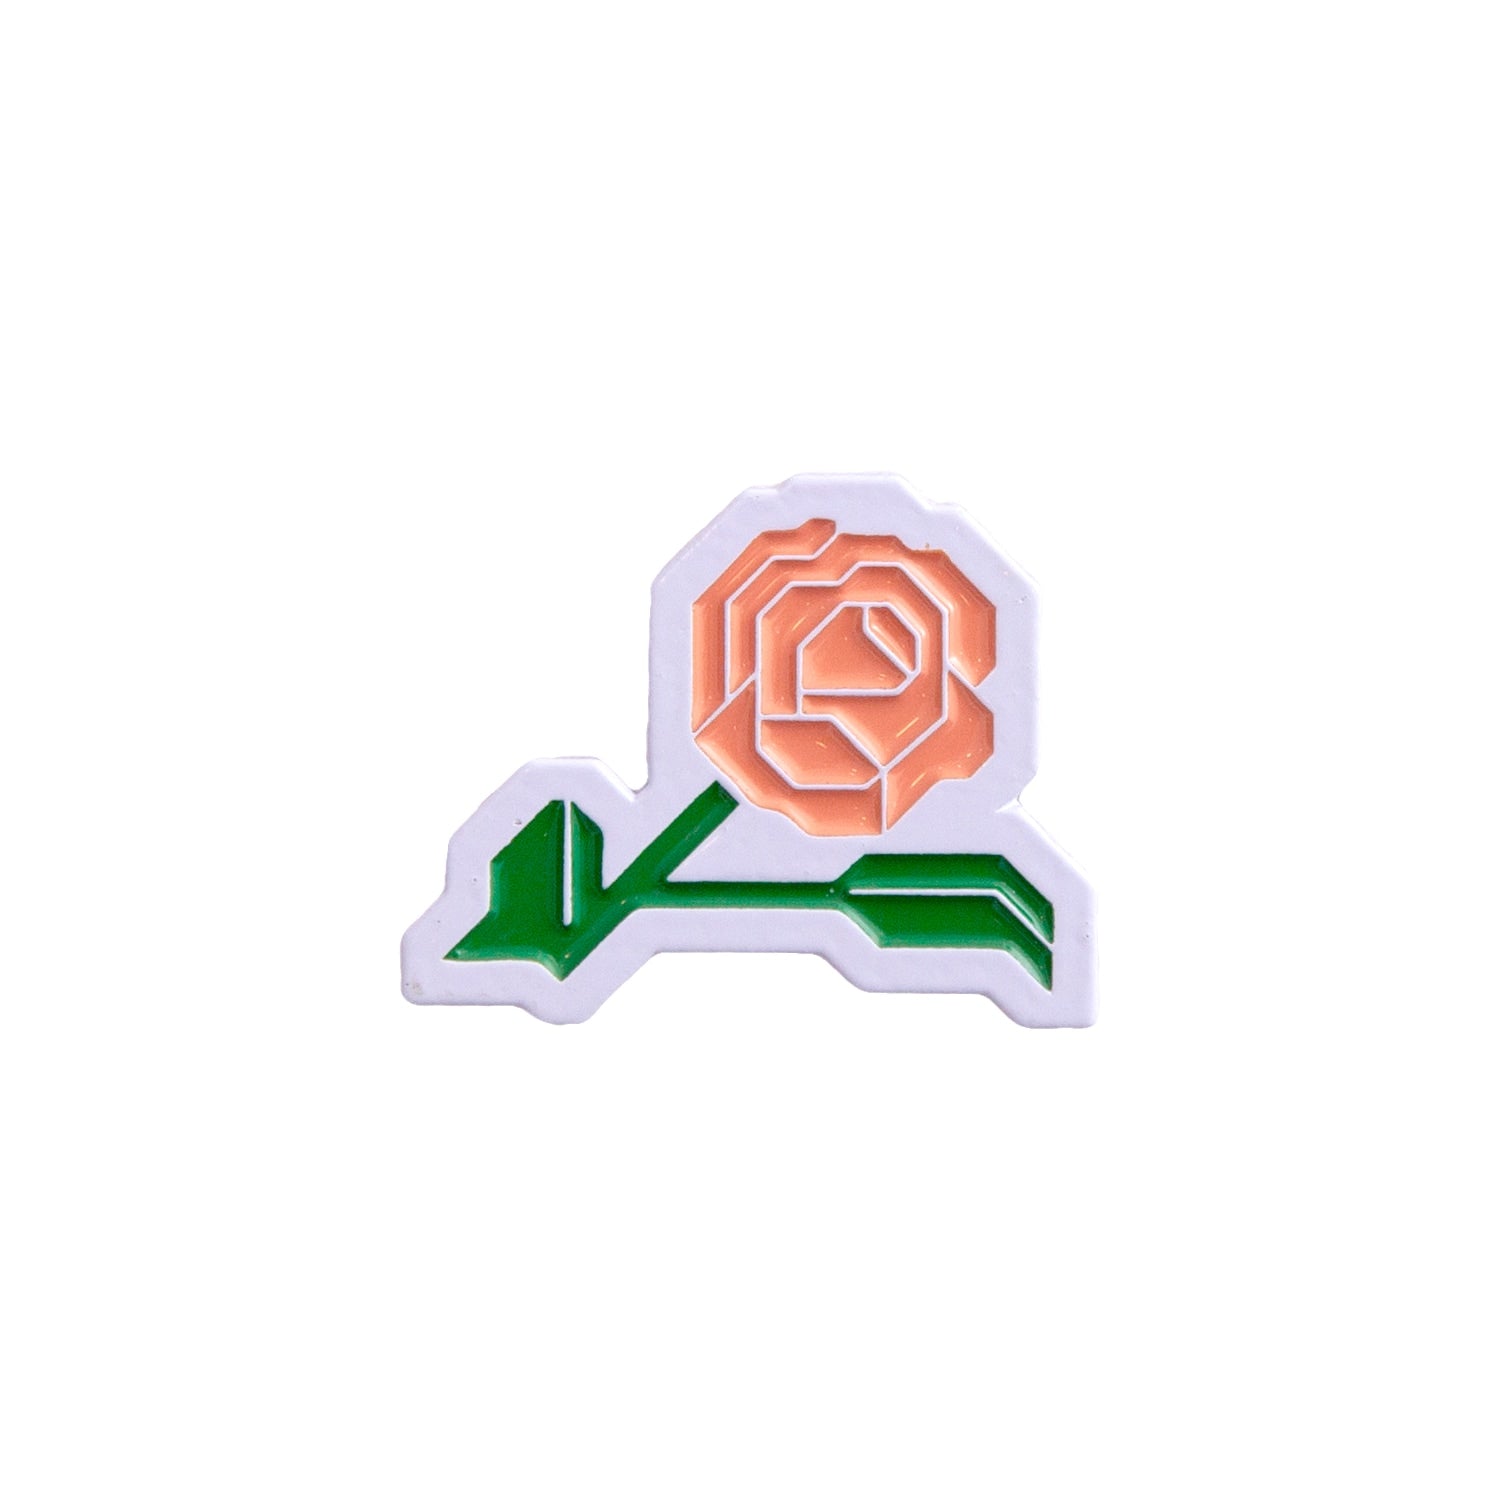 Rose Enamel Pin in pink, green, and white on a white background - Free & Easy